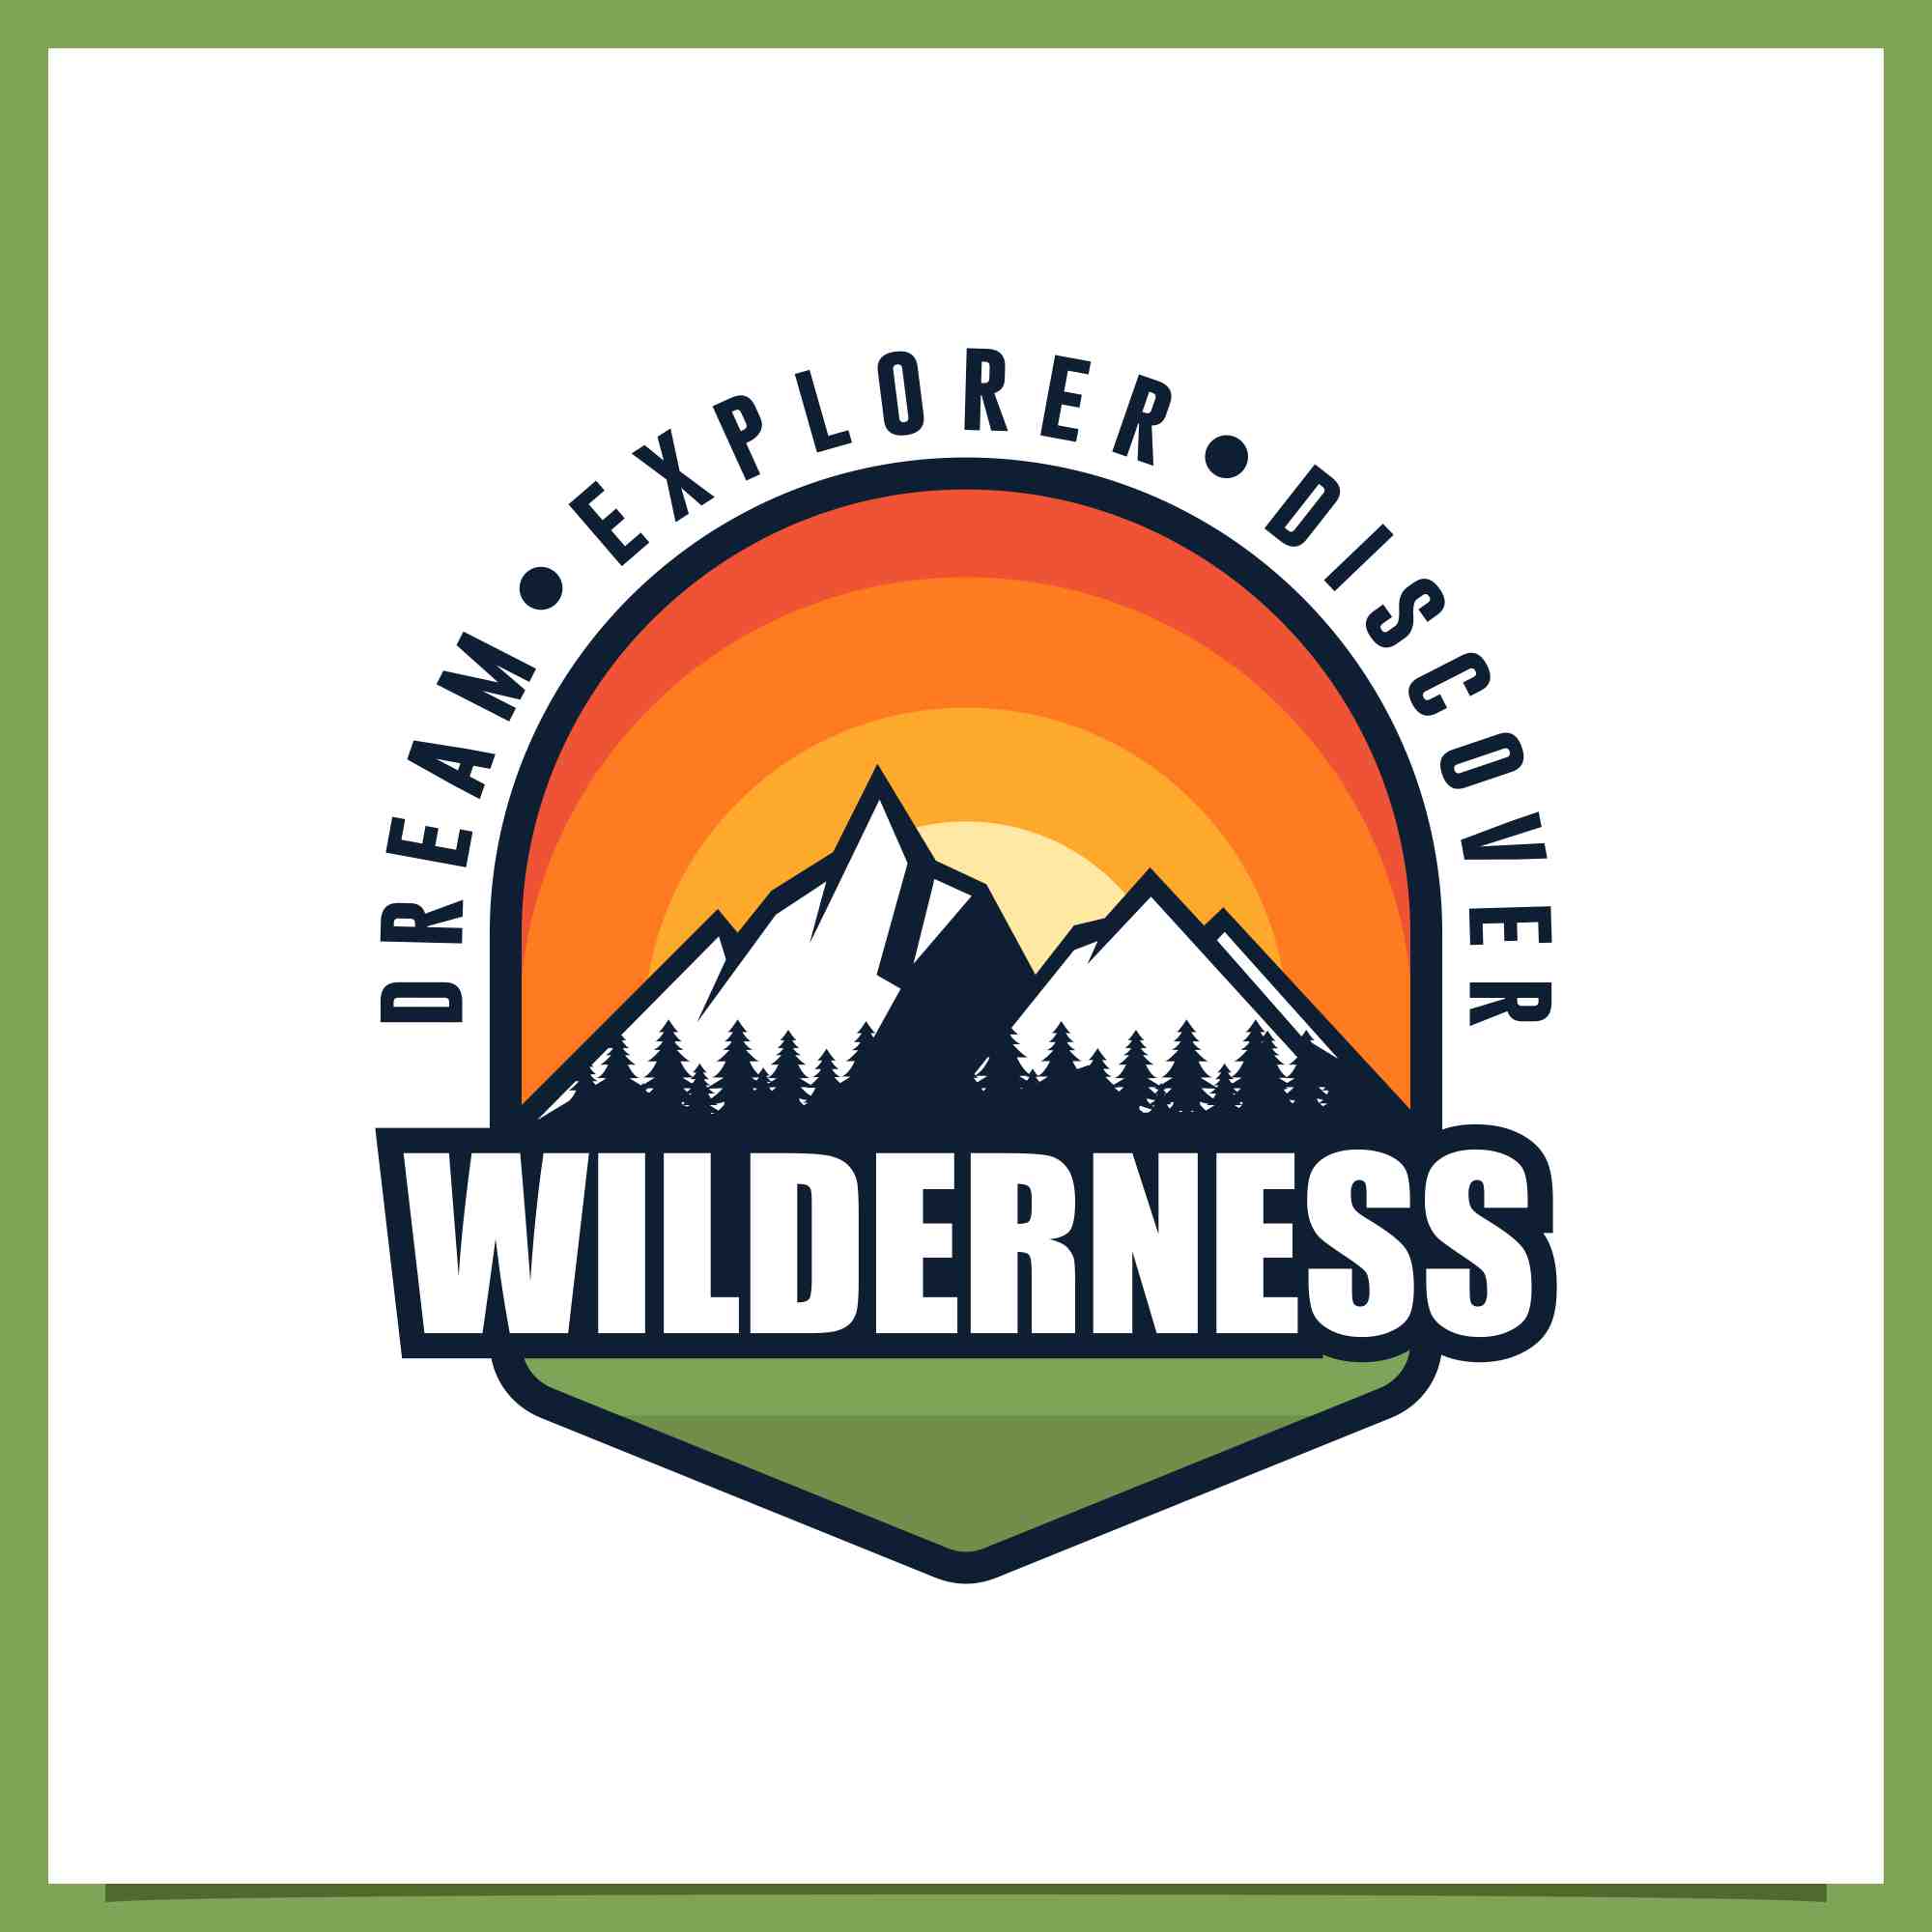 Set Wilderness adventure design logo collection - $5 preview image.